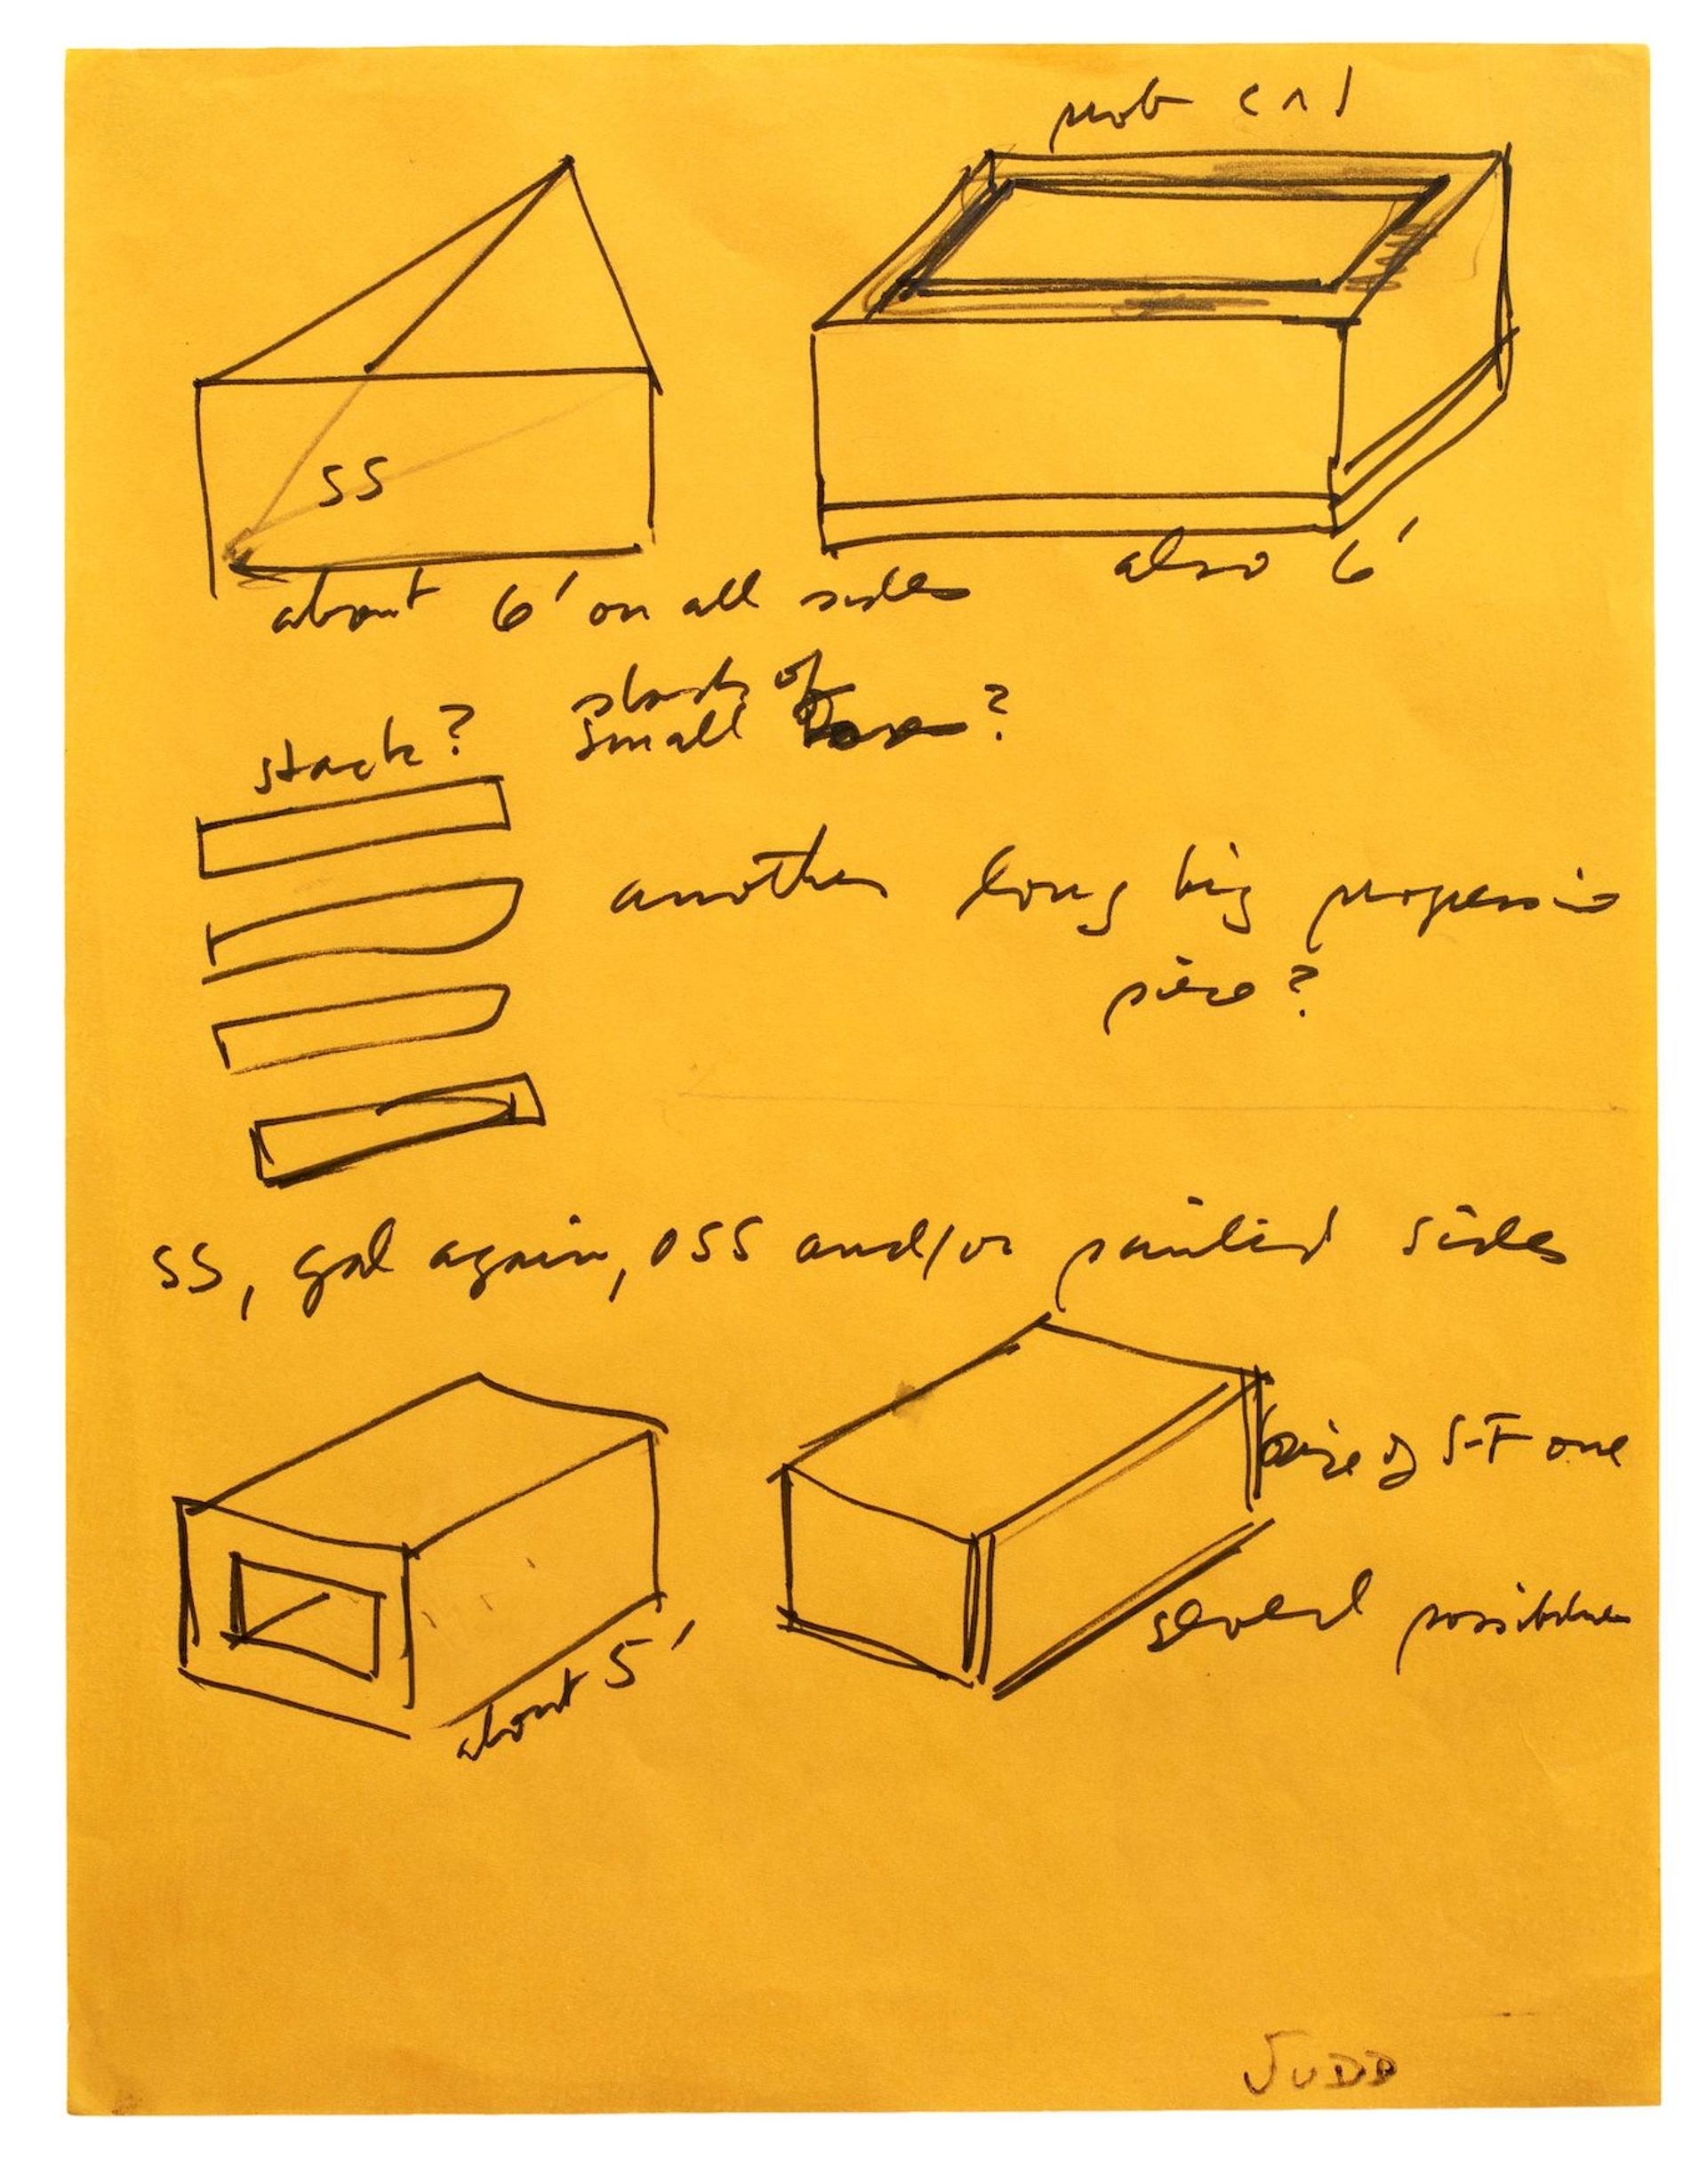 How Did DONALD JUDD Come Up with All Those Boxy Sculptures?